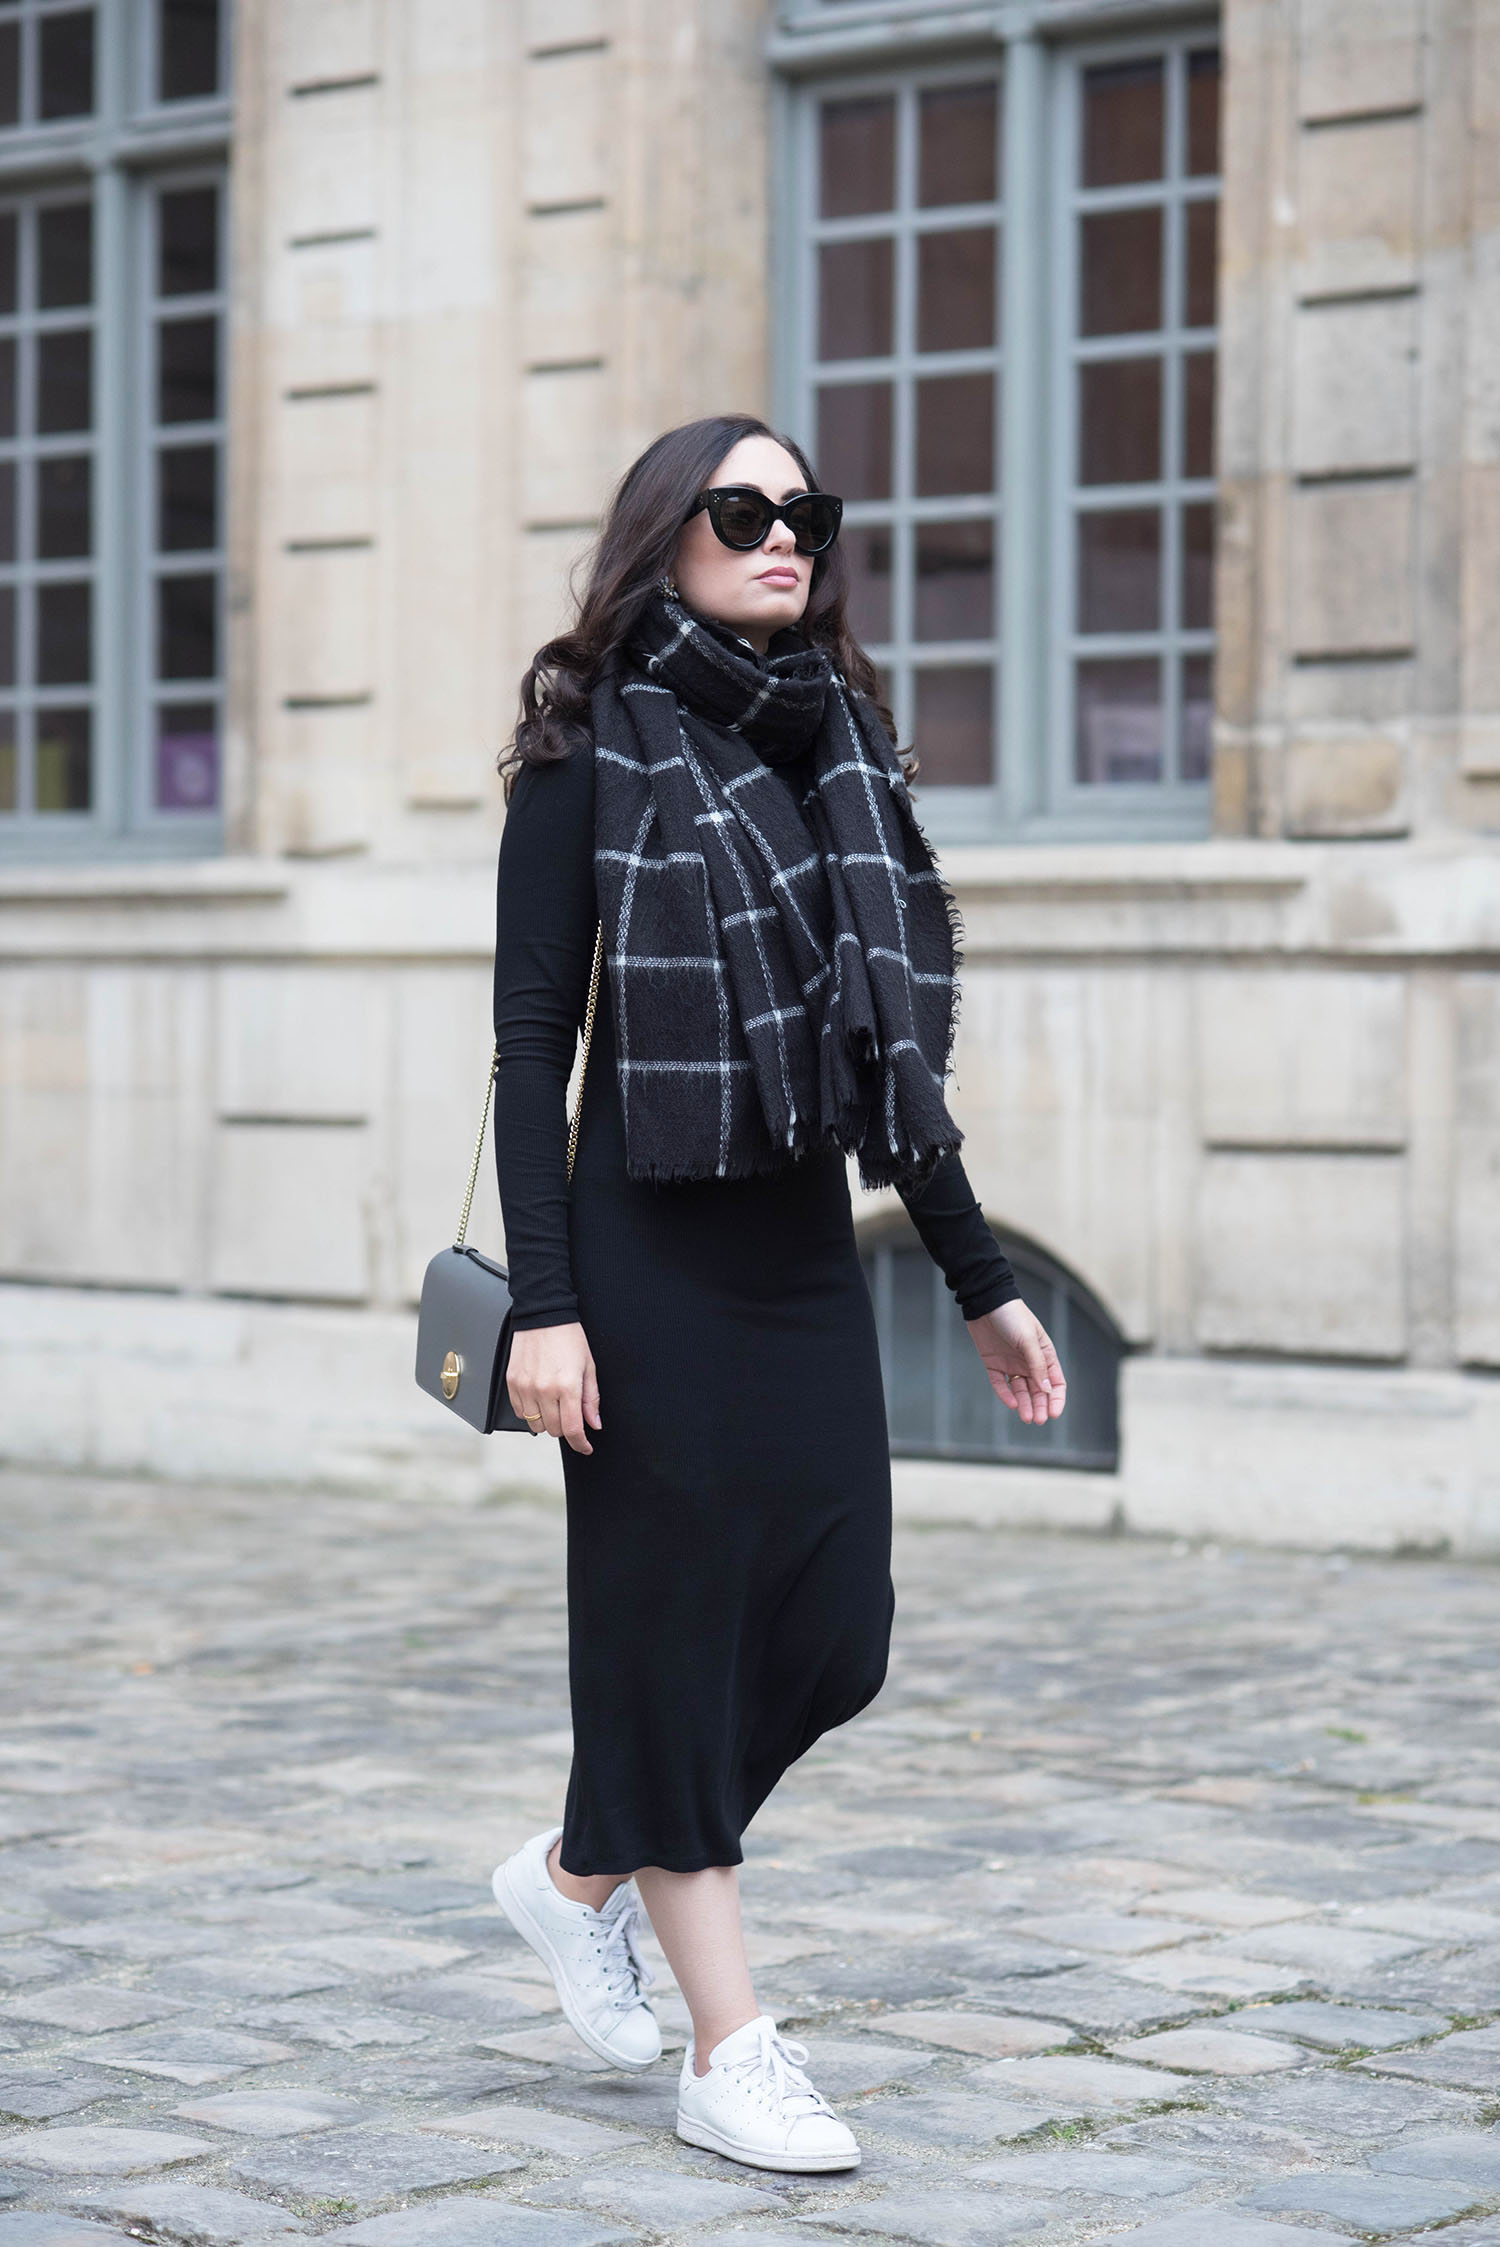 Fashion blogger Cee Fardoe of Coco & Vera walks at the Hotel de Sully in Paris wearing a Privacy Please midway dress and Adidas Stan Smith sneakers